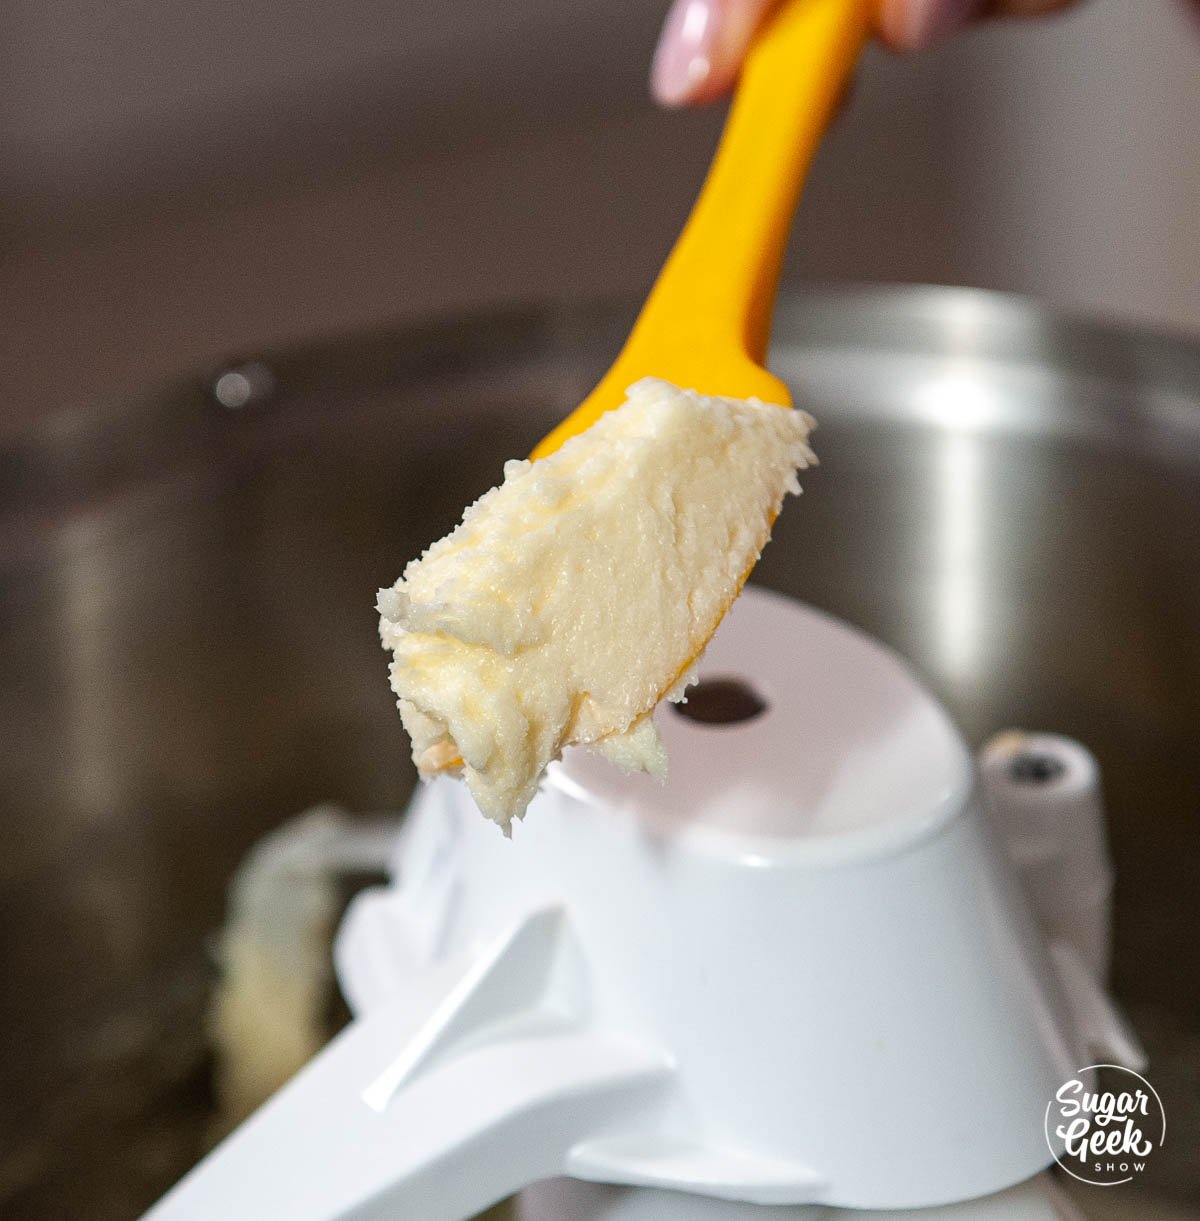 butter and sugar creamed together on an orange spatula